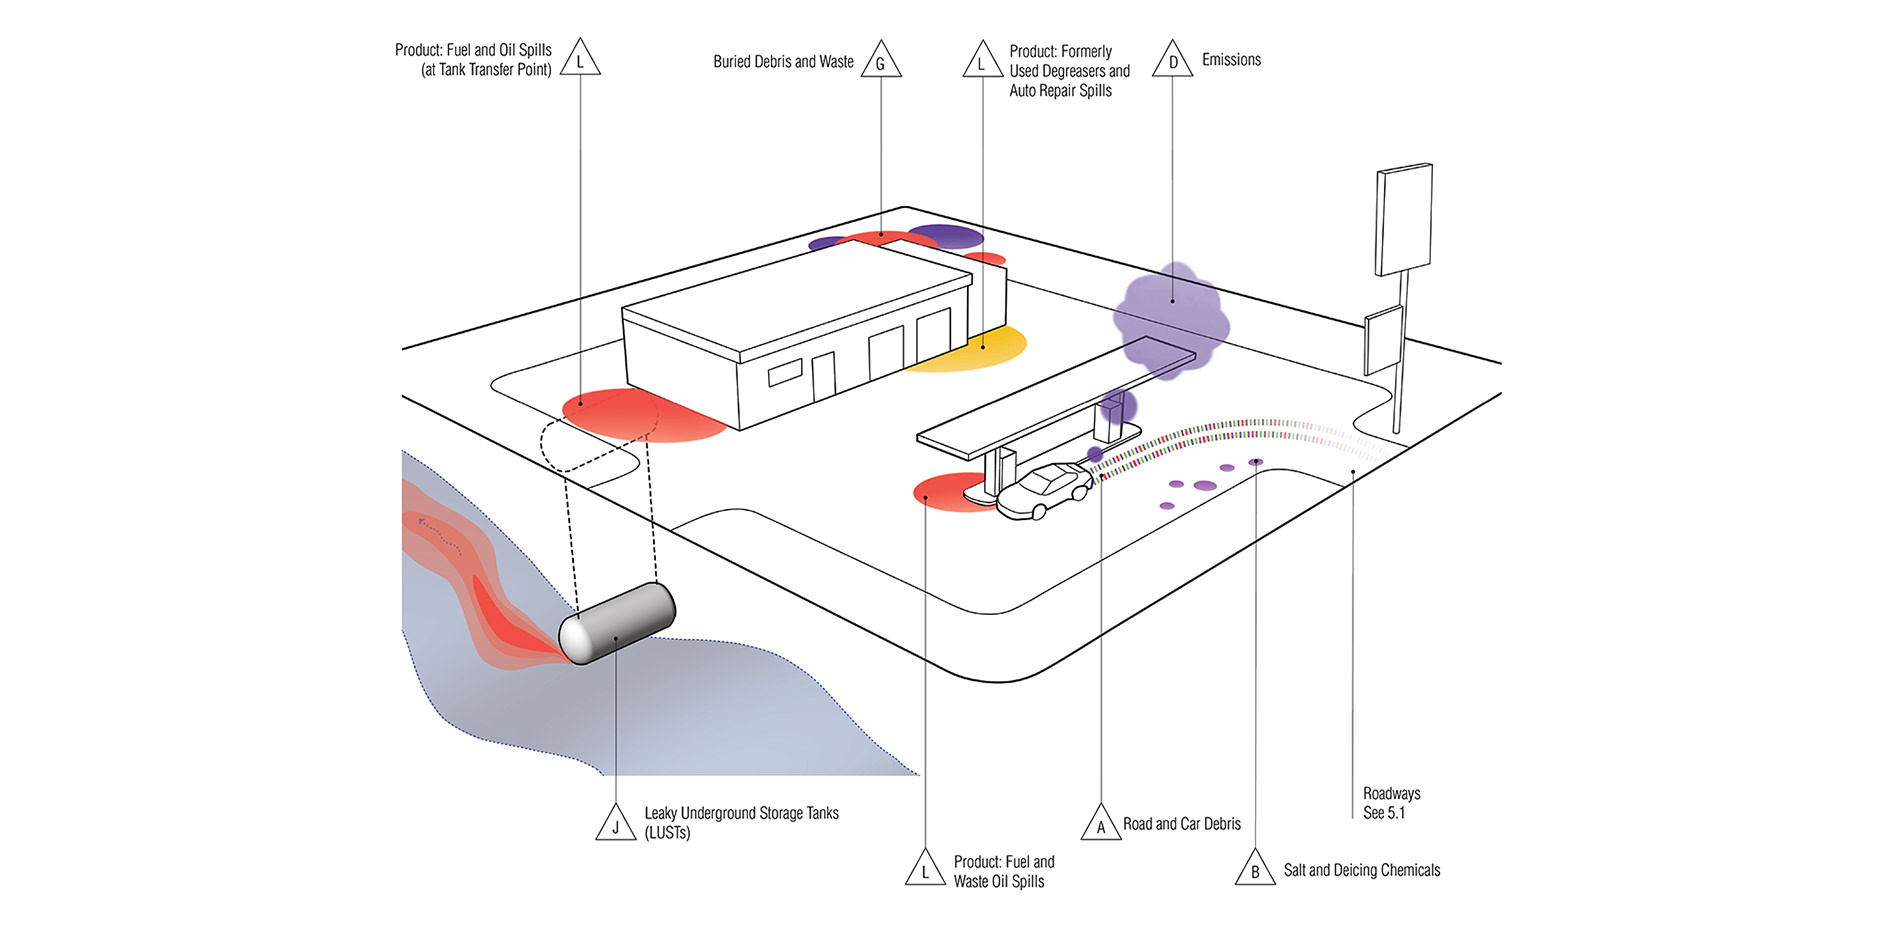 Gas Stations and Auto-Repair Shops: Sources of Contamination Illustration